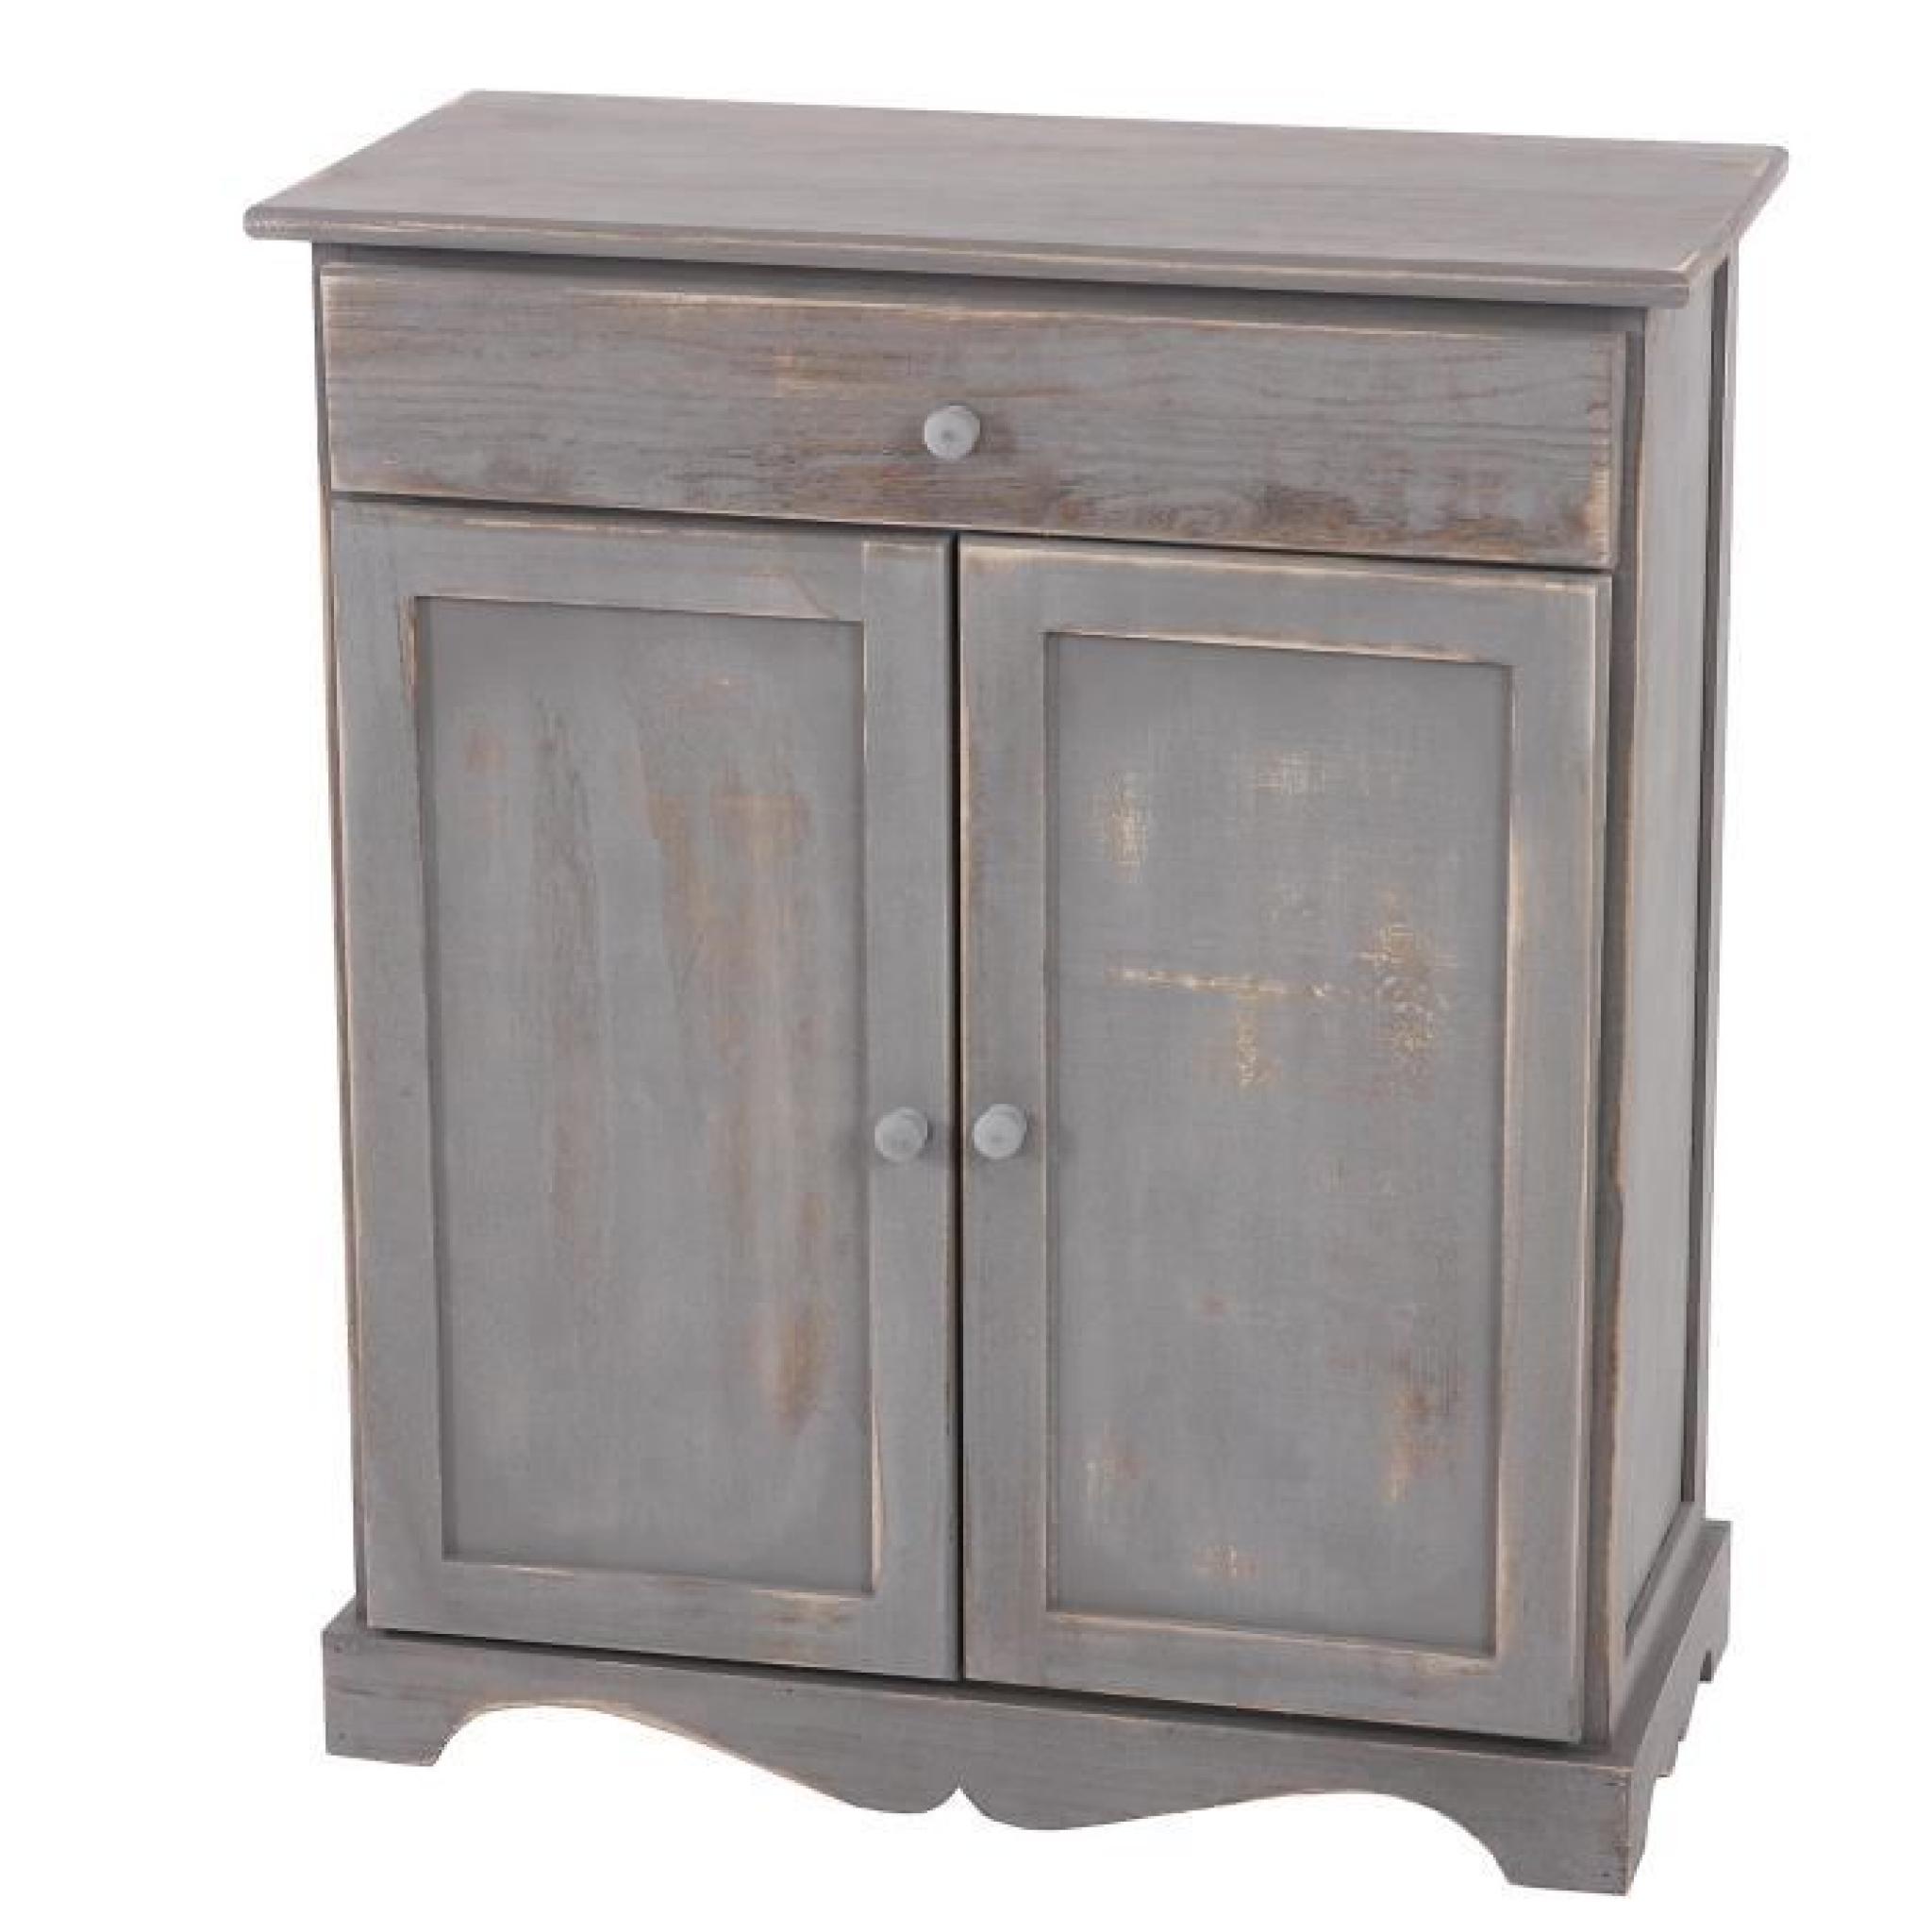 Commode / table d'appoint / armoire,66x33x78cm, shabby, vintage, gris.